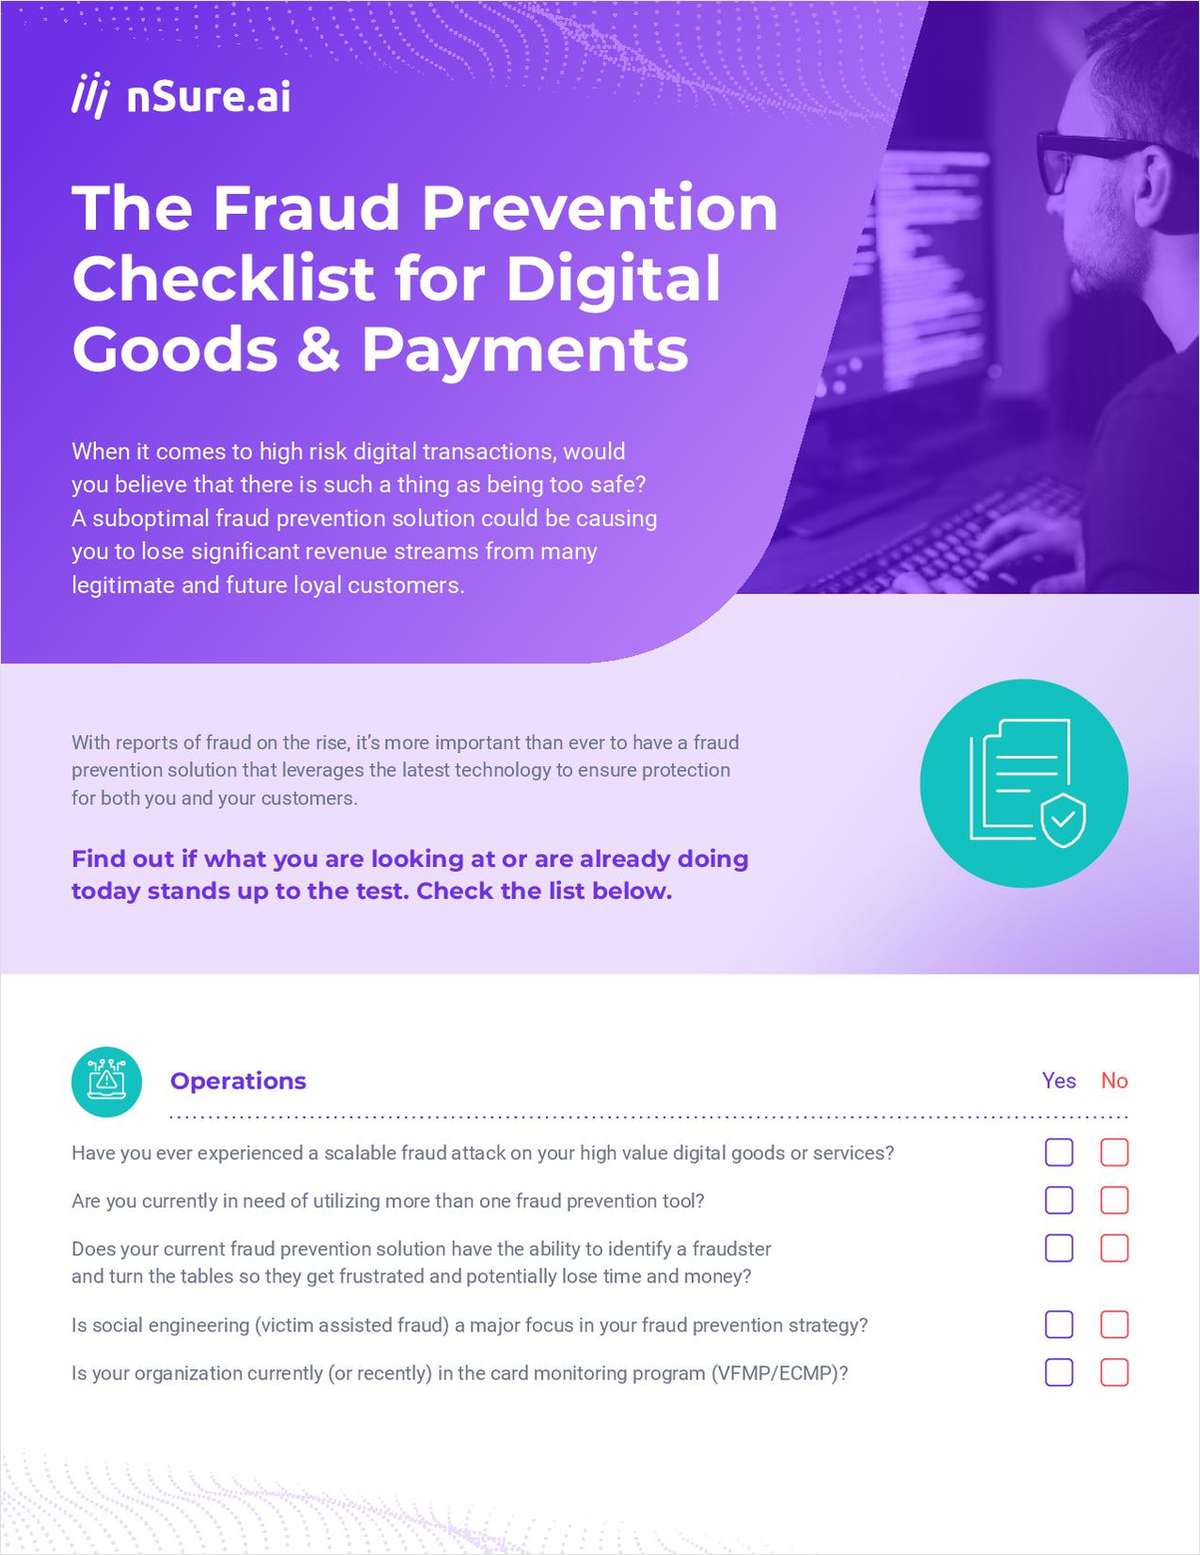 The Fraud Prevention Checklist for Digital Goods & Payments